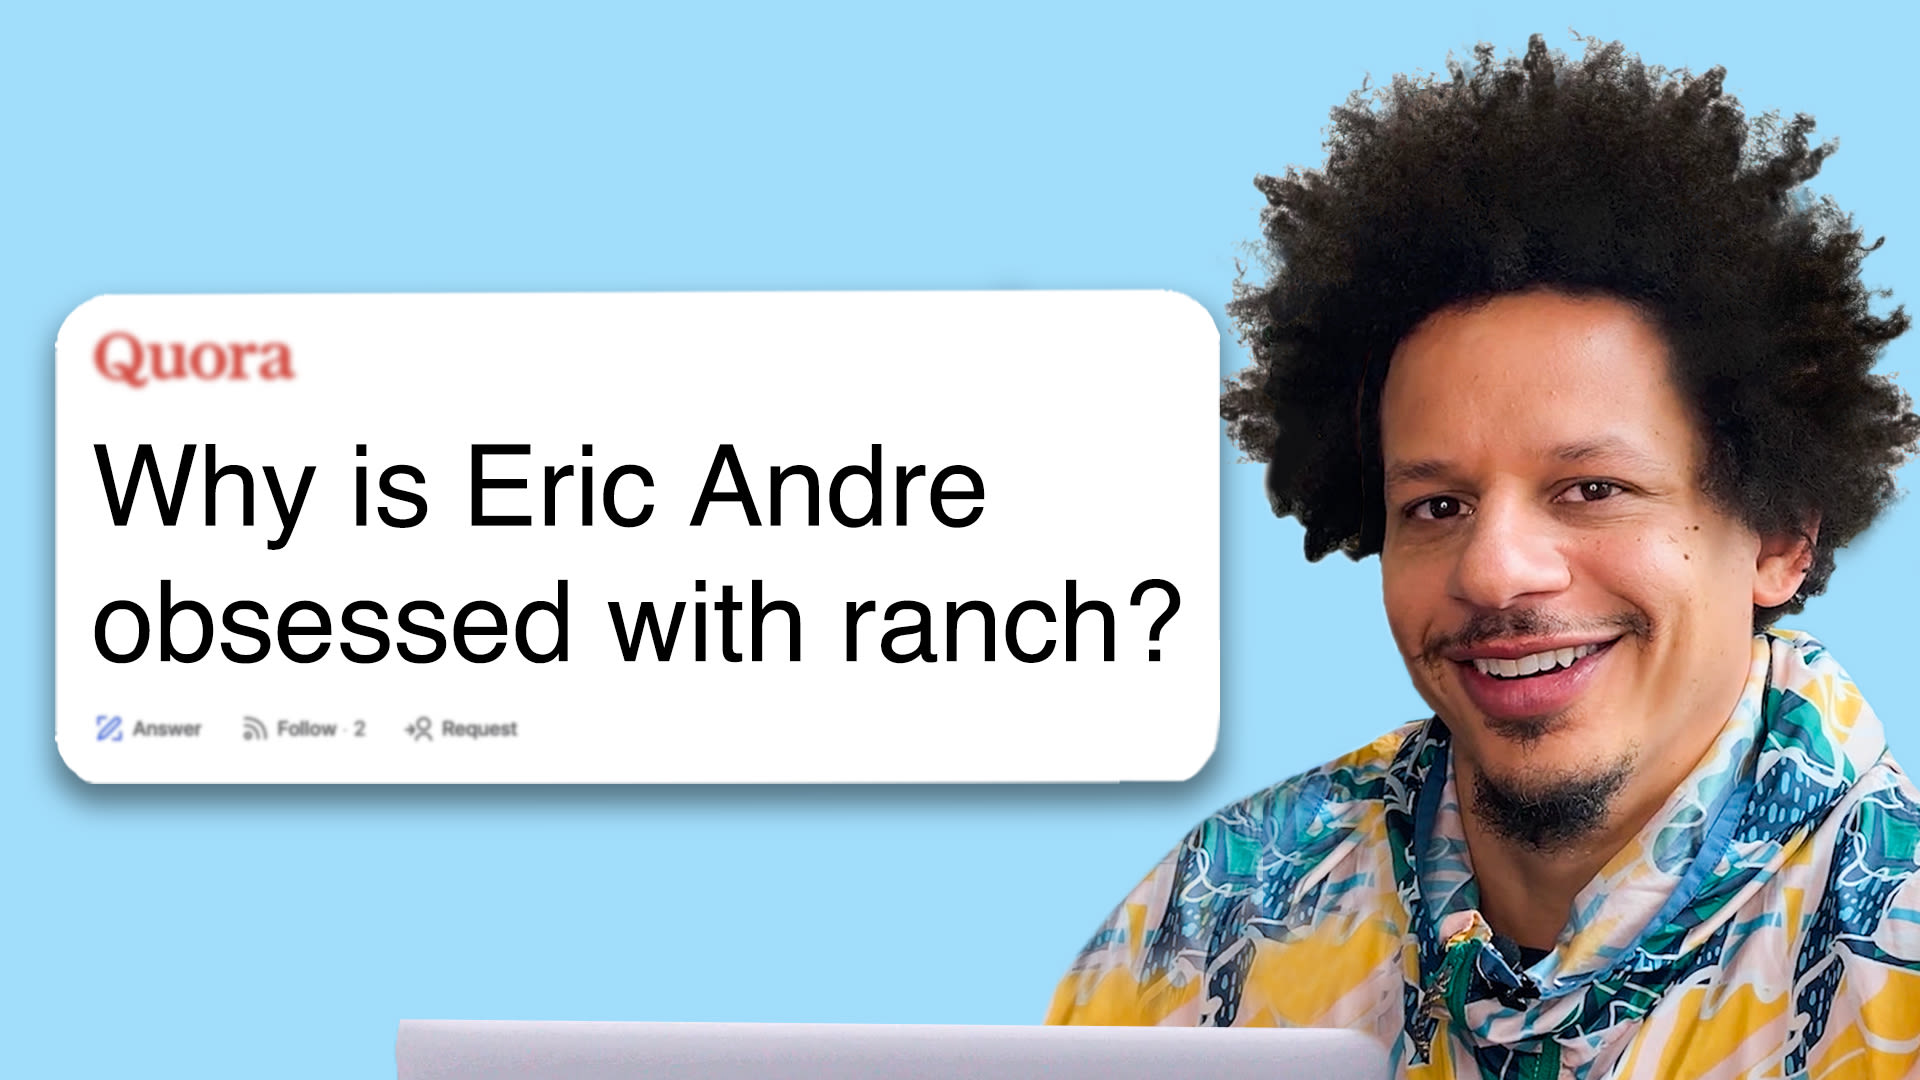 Eric Andre Goes Undercover on Reddit, YouTube and Twitter.